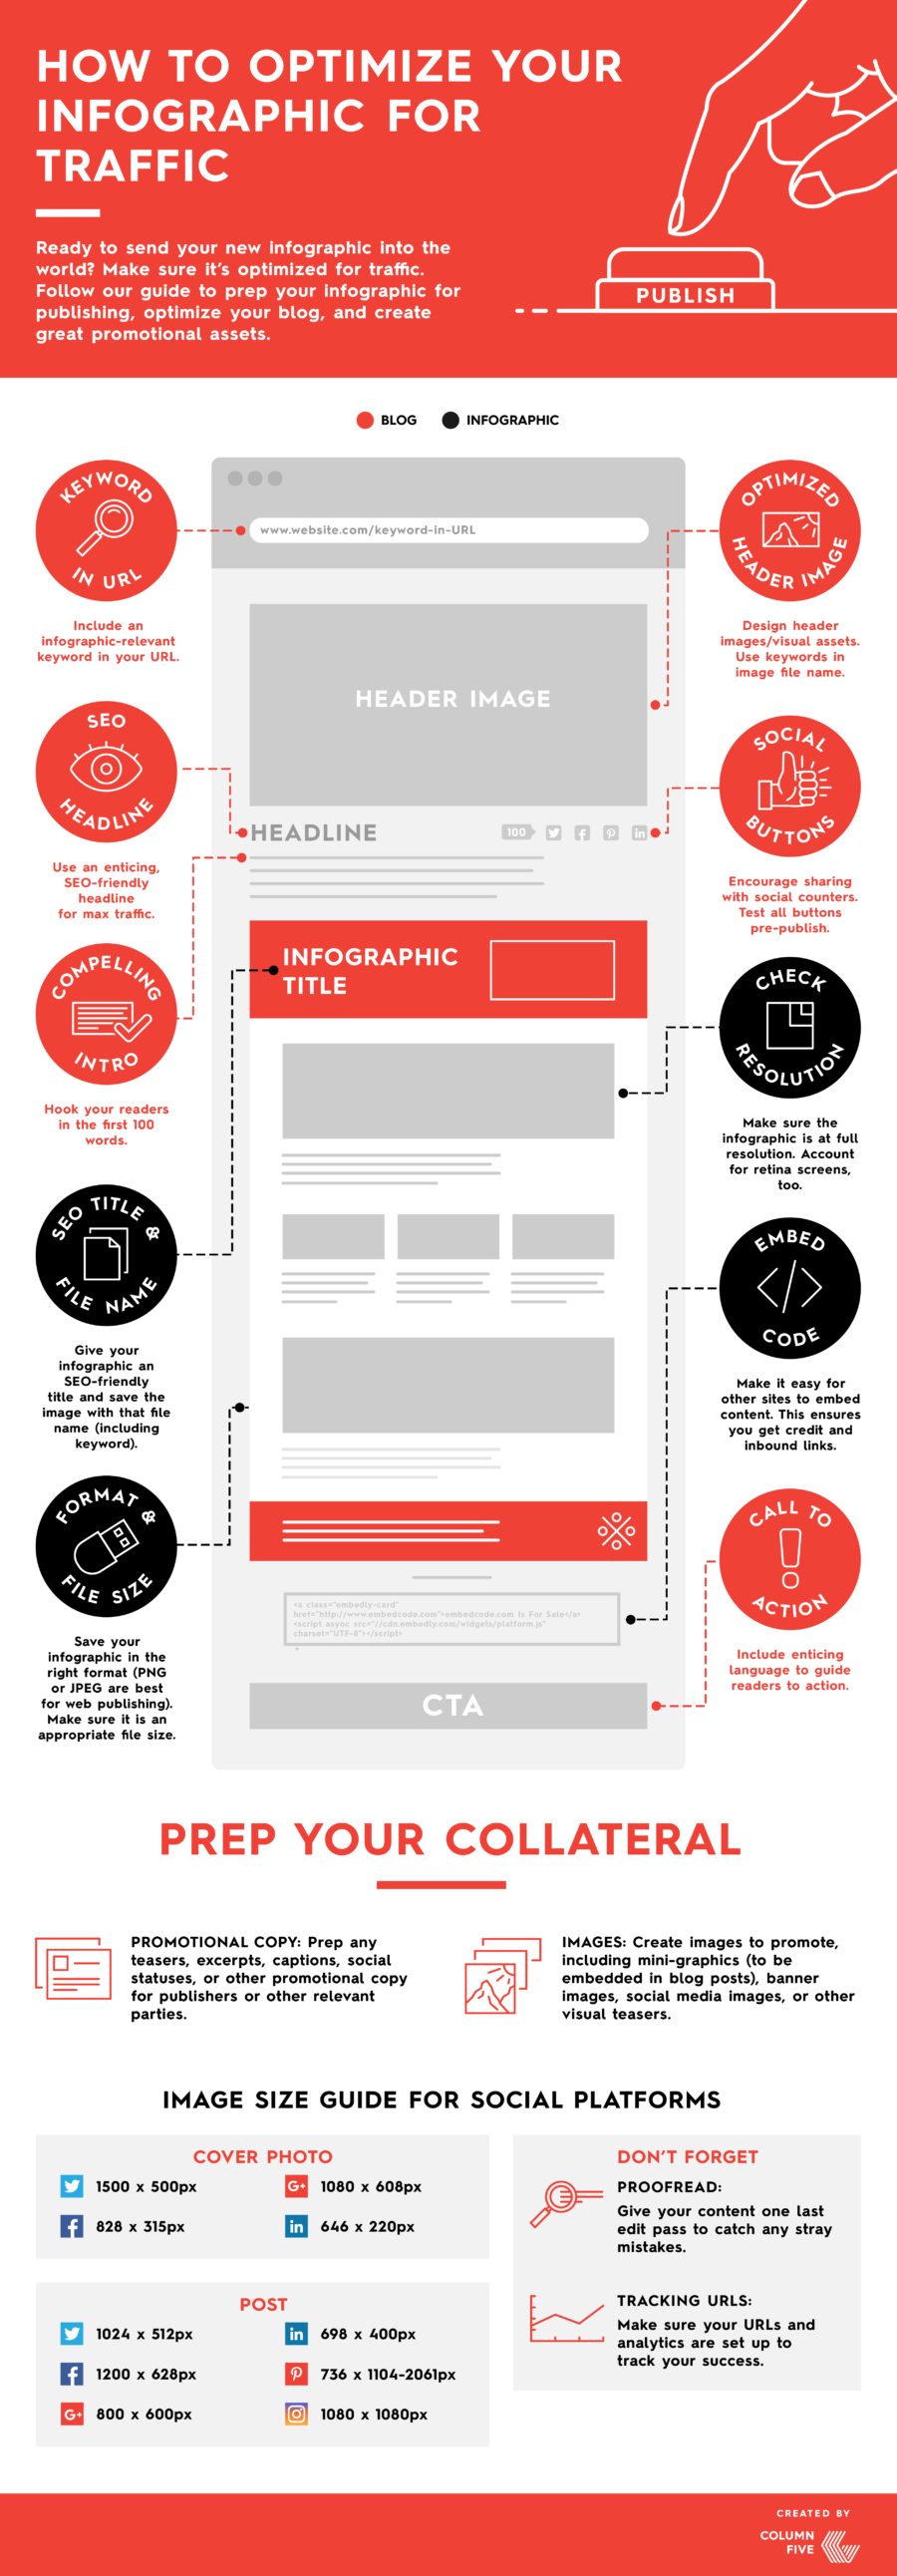 How to Optimize your infographic for Traffic